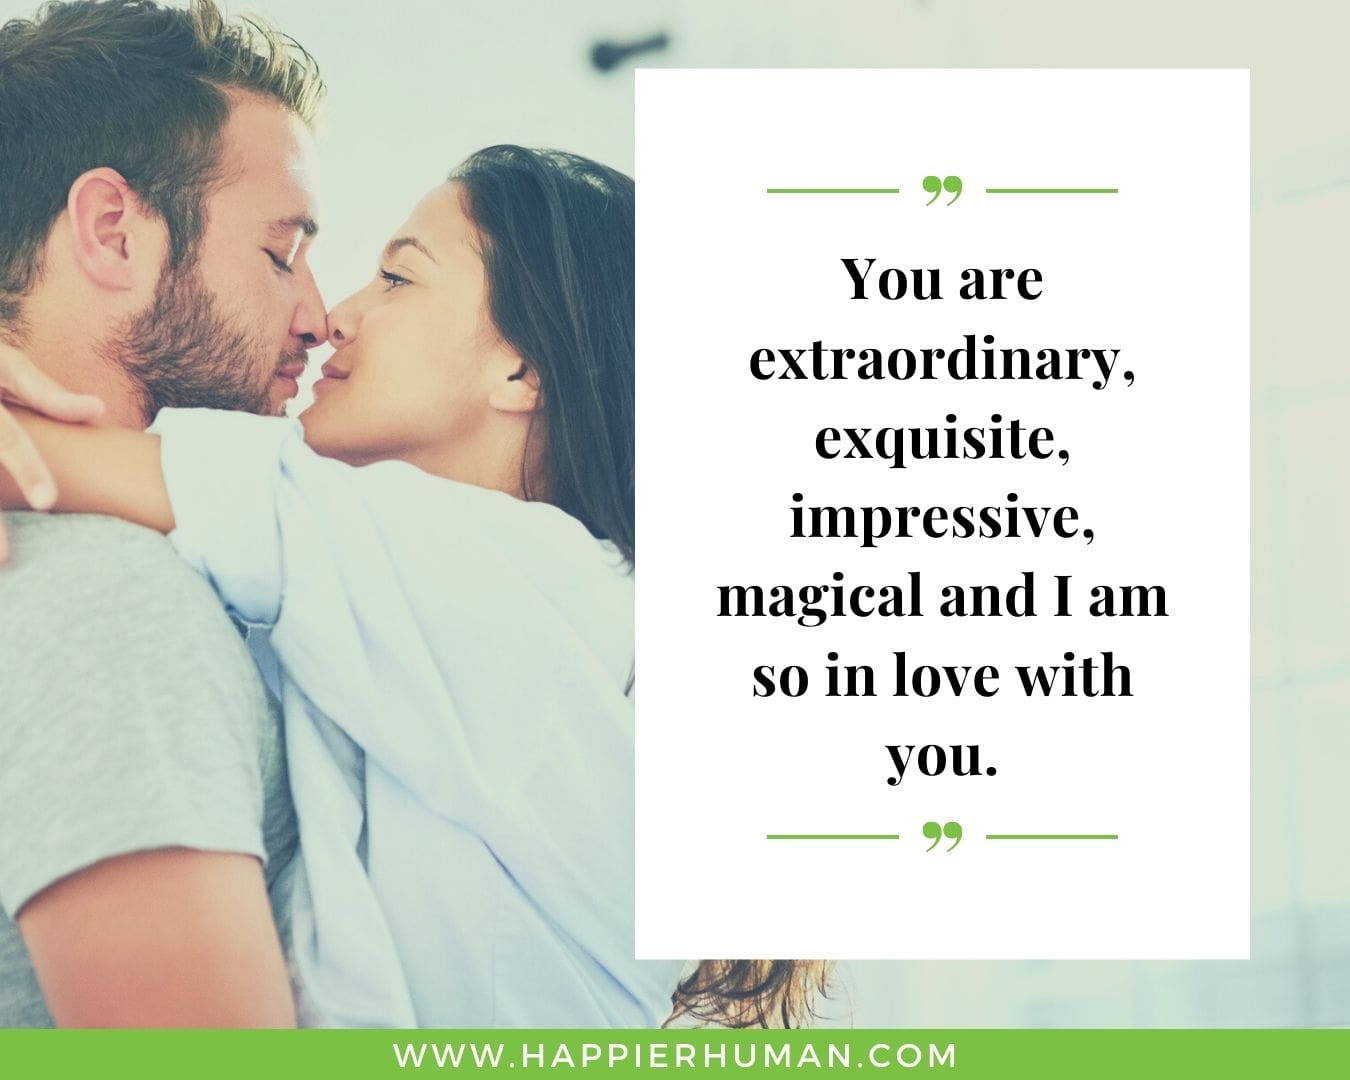 Romance Love Quotes for Her - “You are extraordinary, exquisite, impressive, magical and I am so in love with you.”